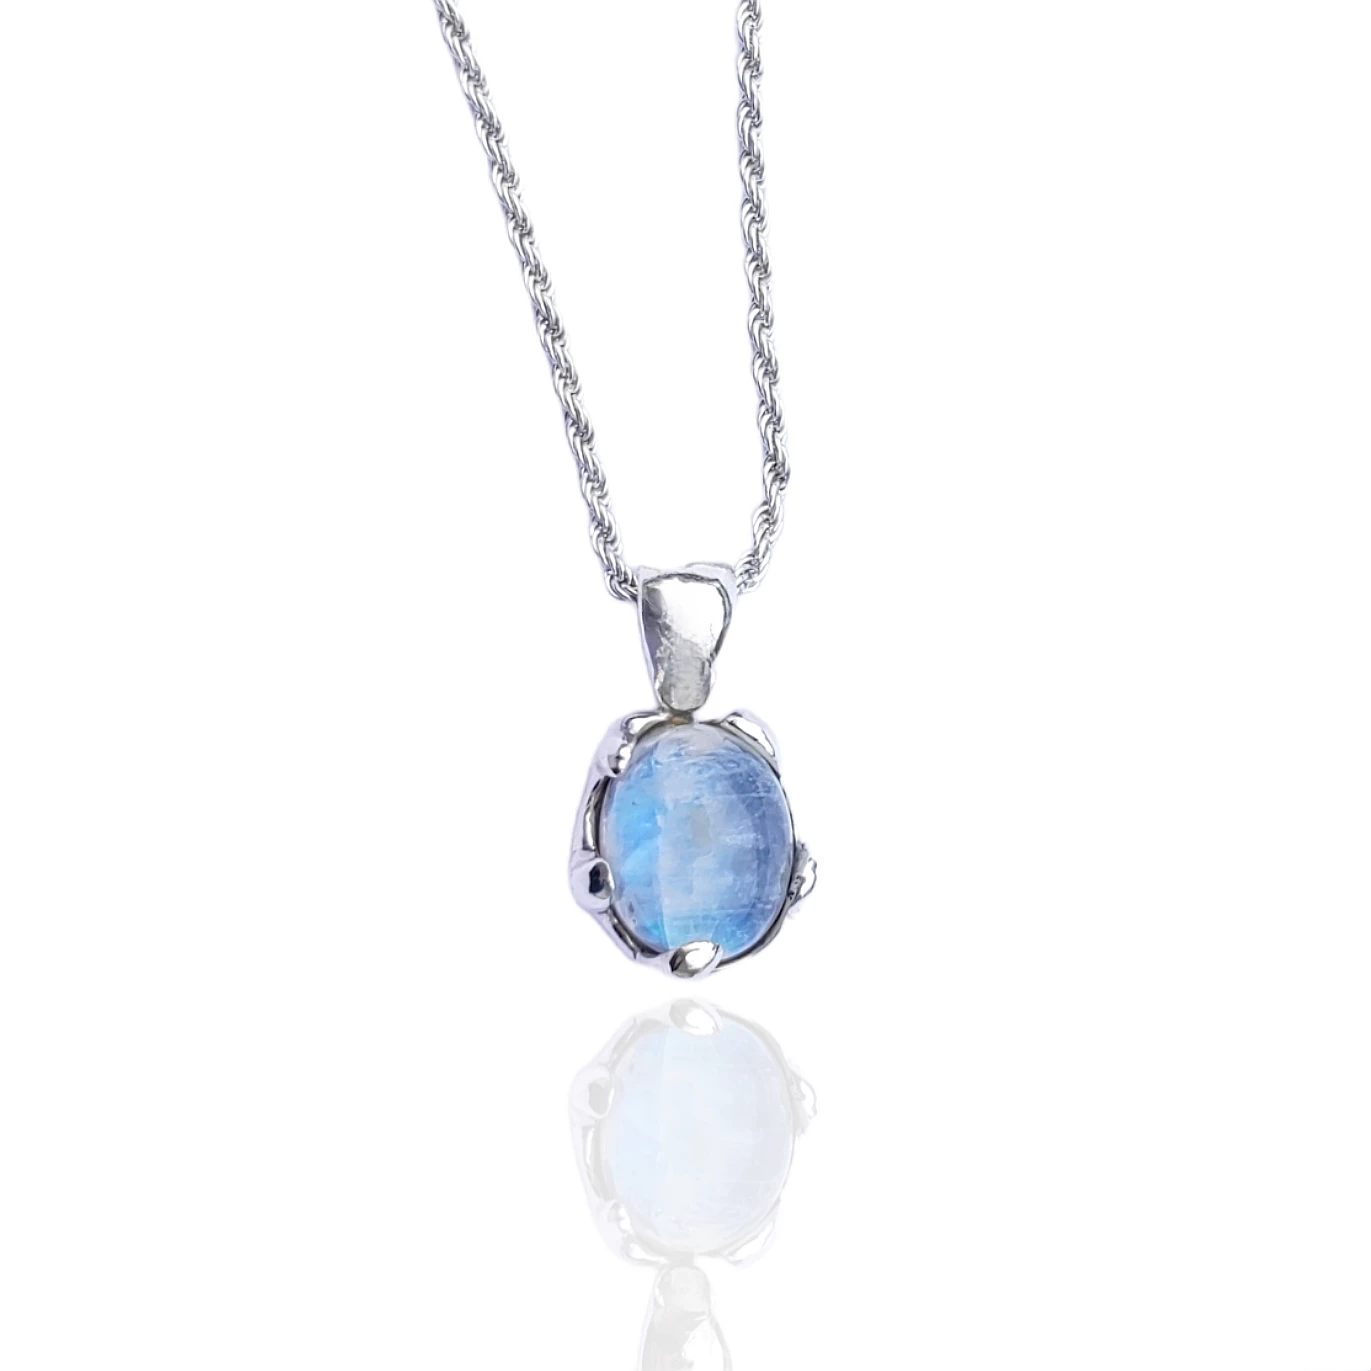 Melted moonstone necklace